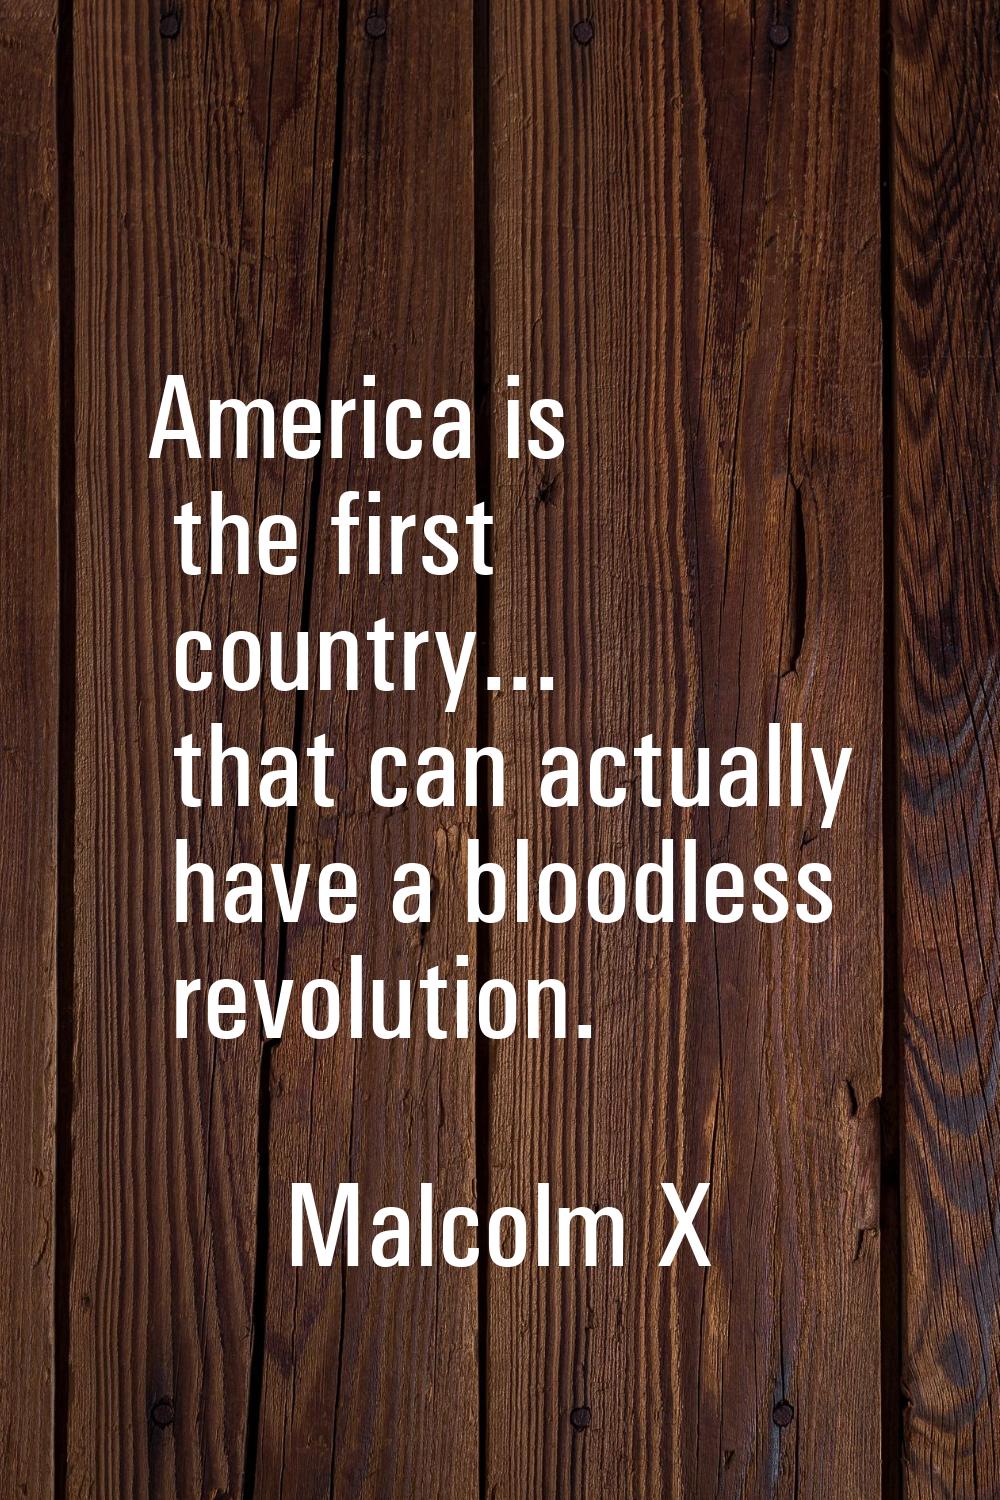 America is the first country... that can actually have a bloodless revolution.